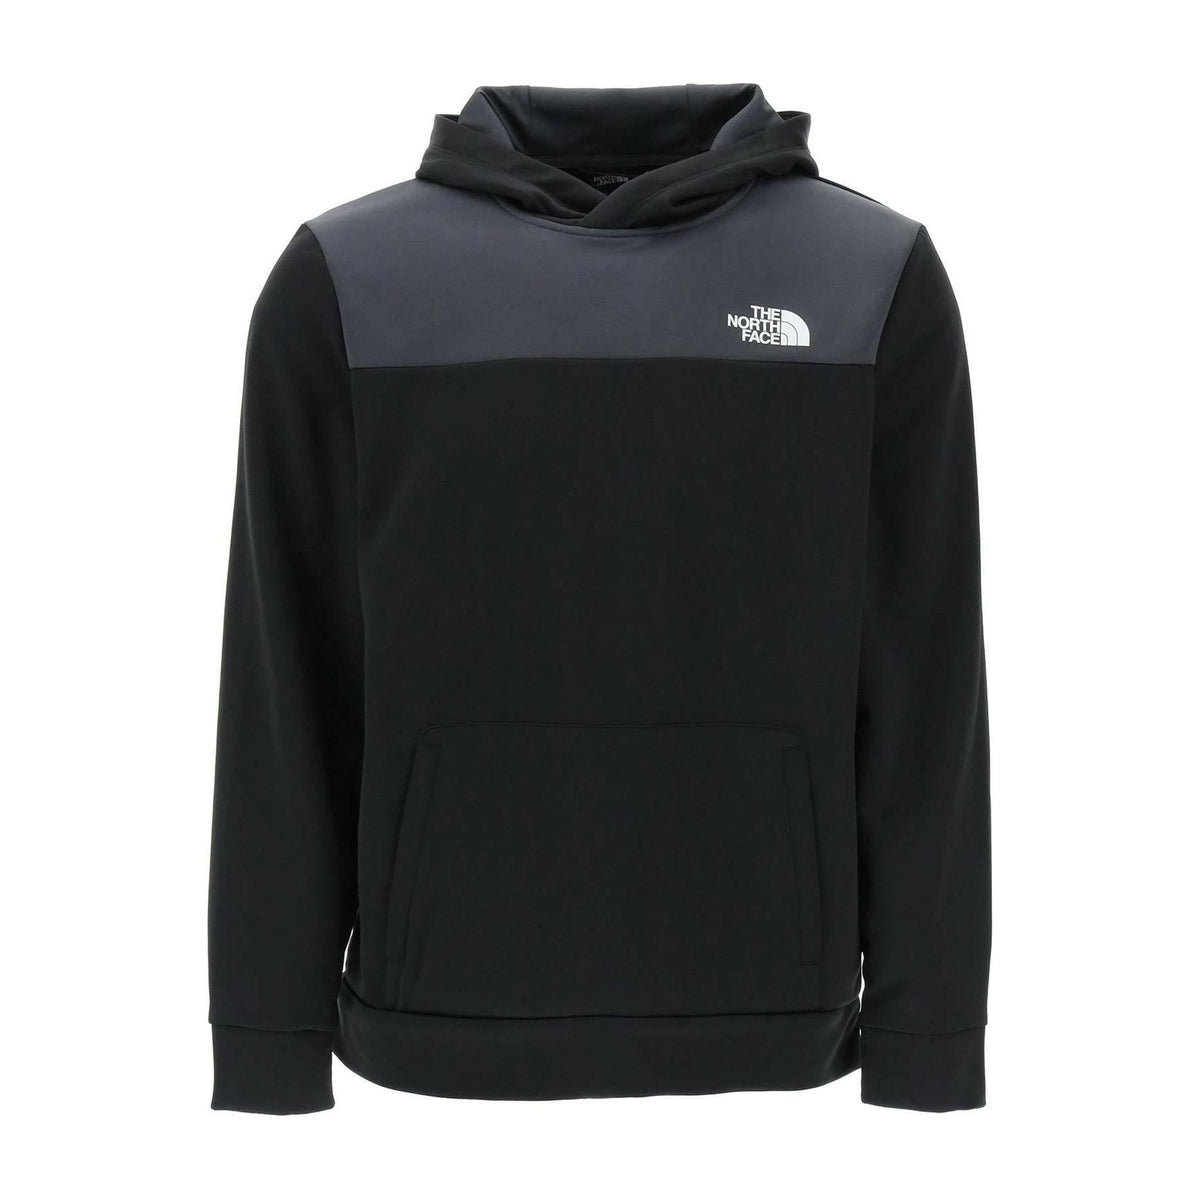 Black and Asphalt Gray Reaxion Hooded Sweater THE NORTH FACE JOHN JULIA.